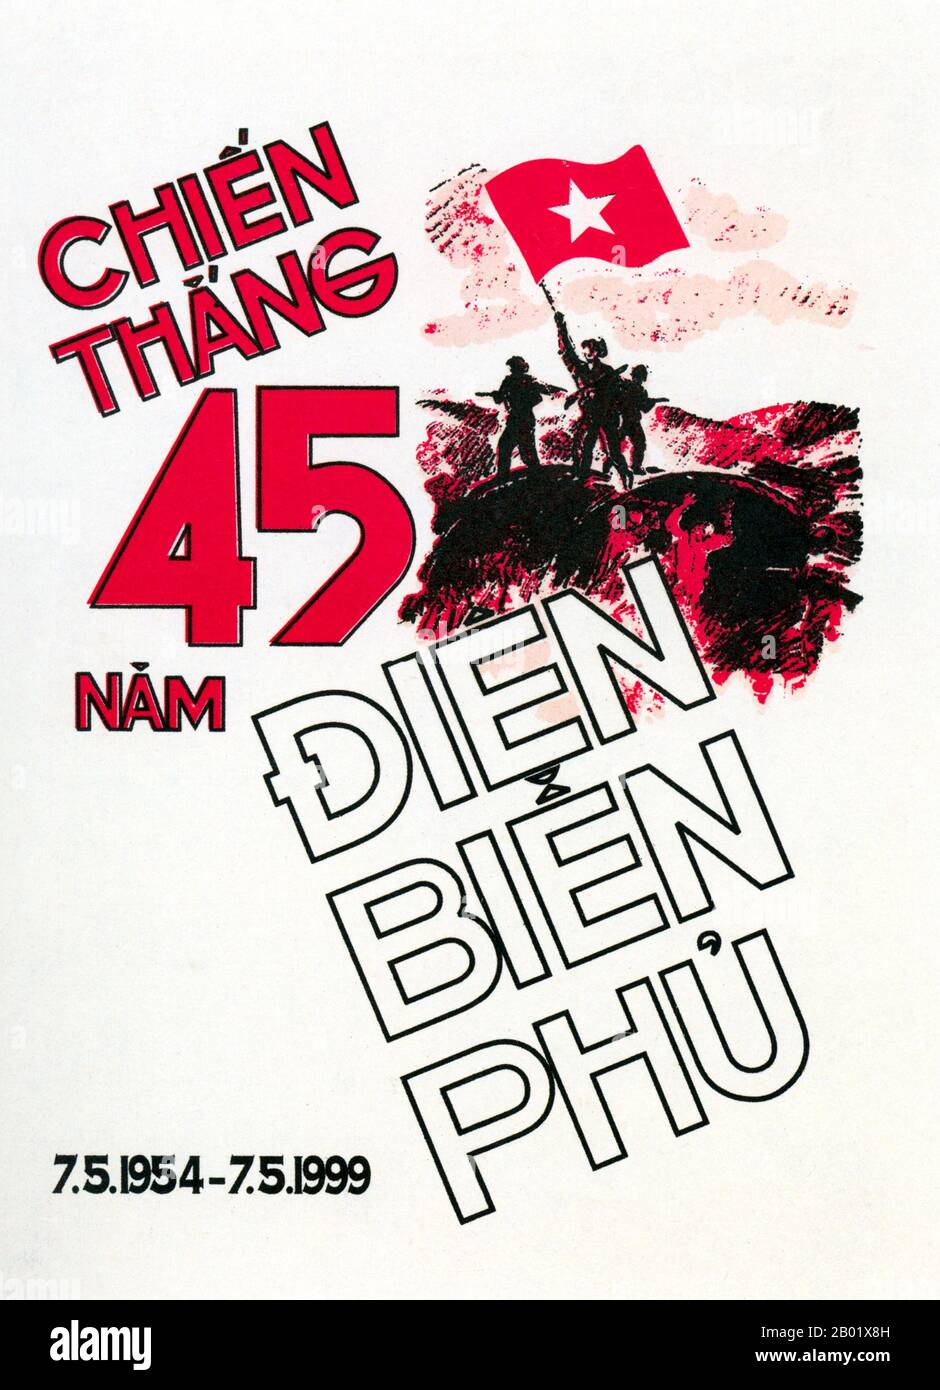 The Important Battle Of Dien Bien Phu Was Fought Between The Việt Minh (Led  By General Vo Nguyen Giap), And The French Union (Led By General Henri  Navarre, Successor To General Raoul